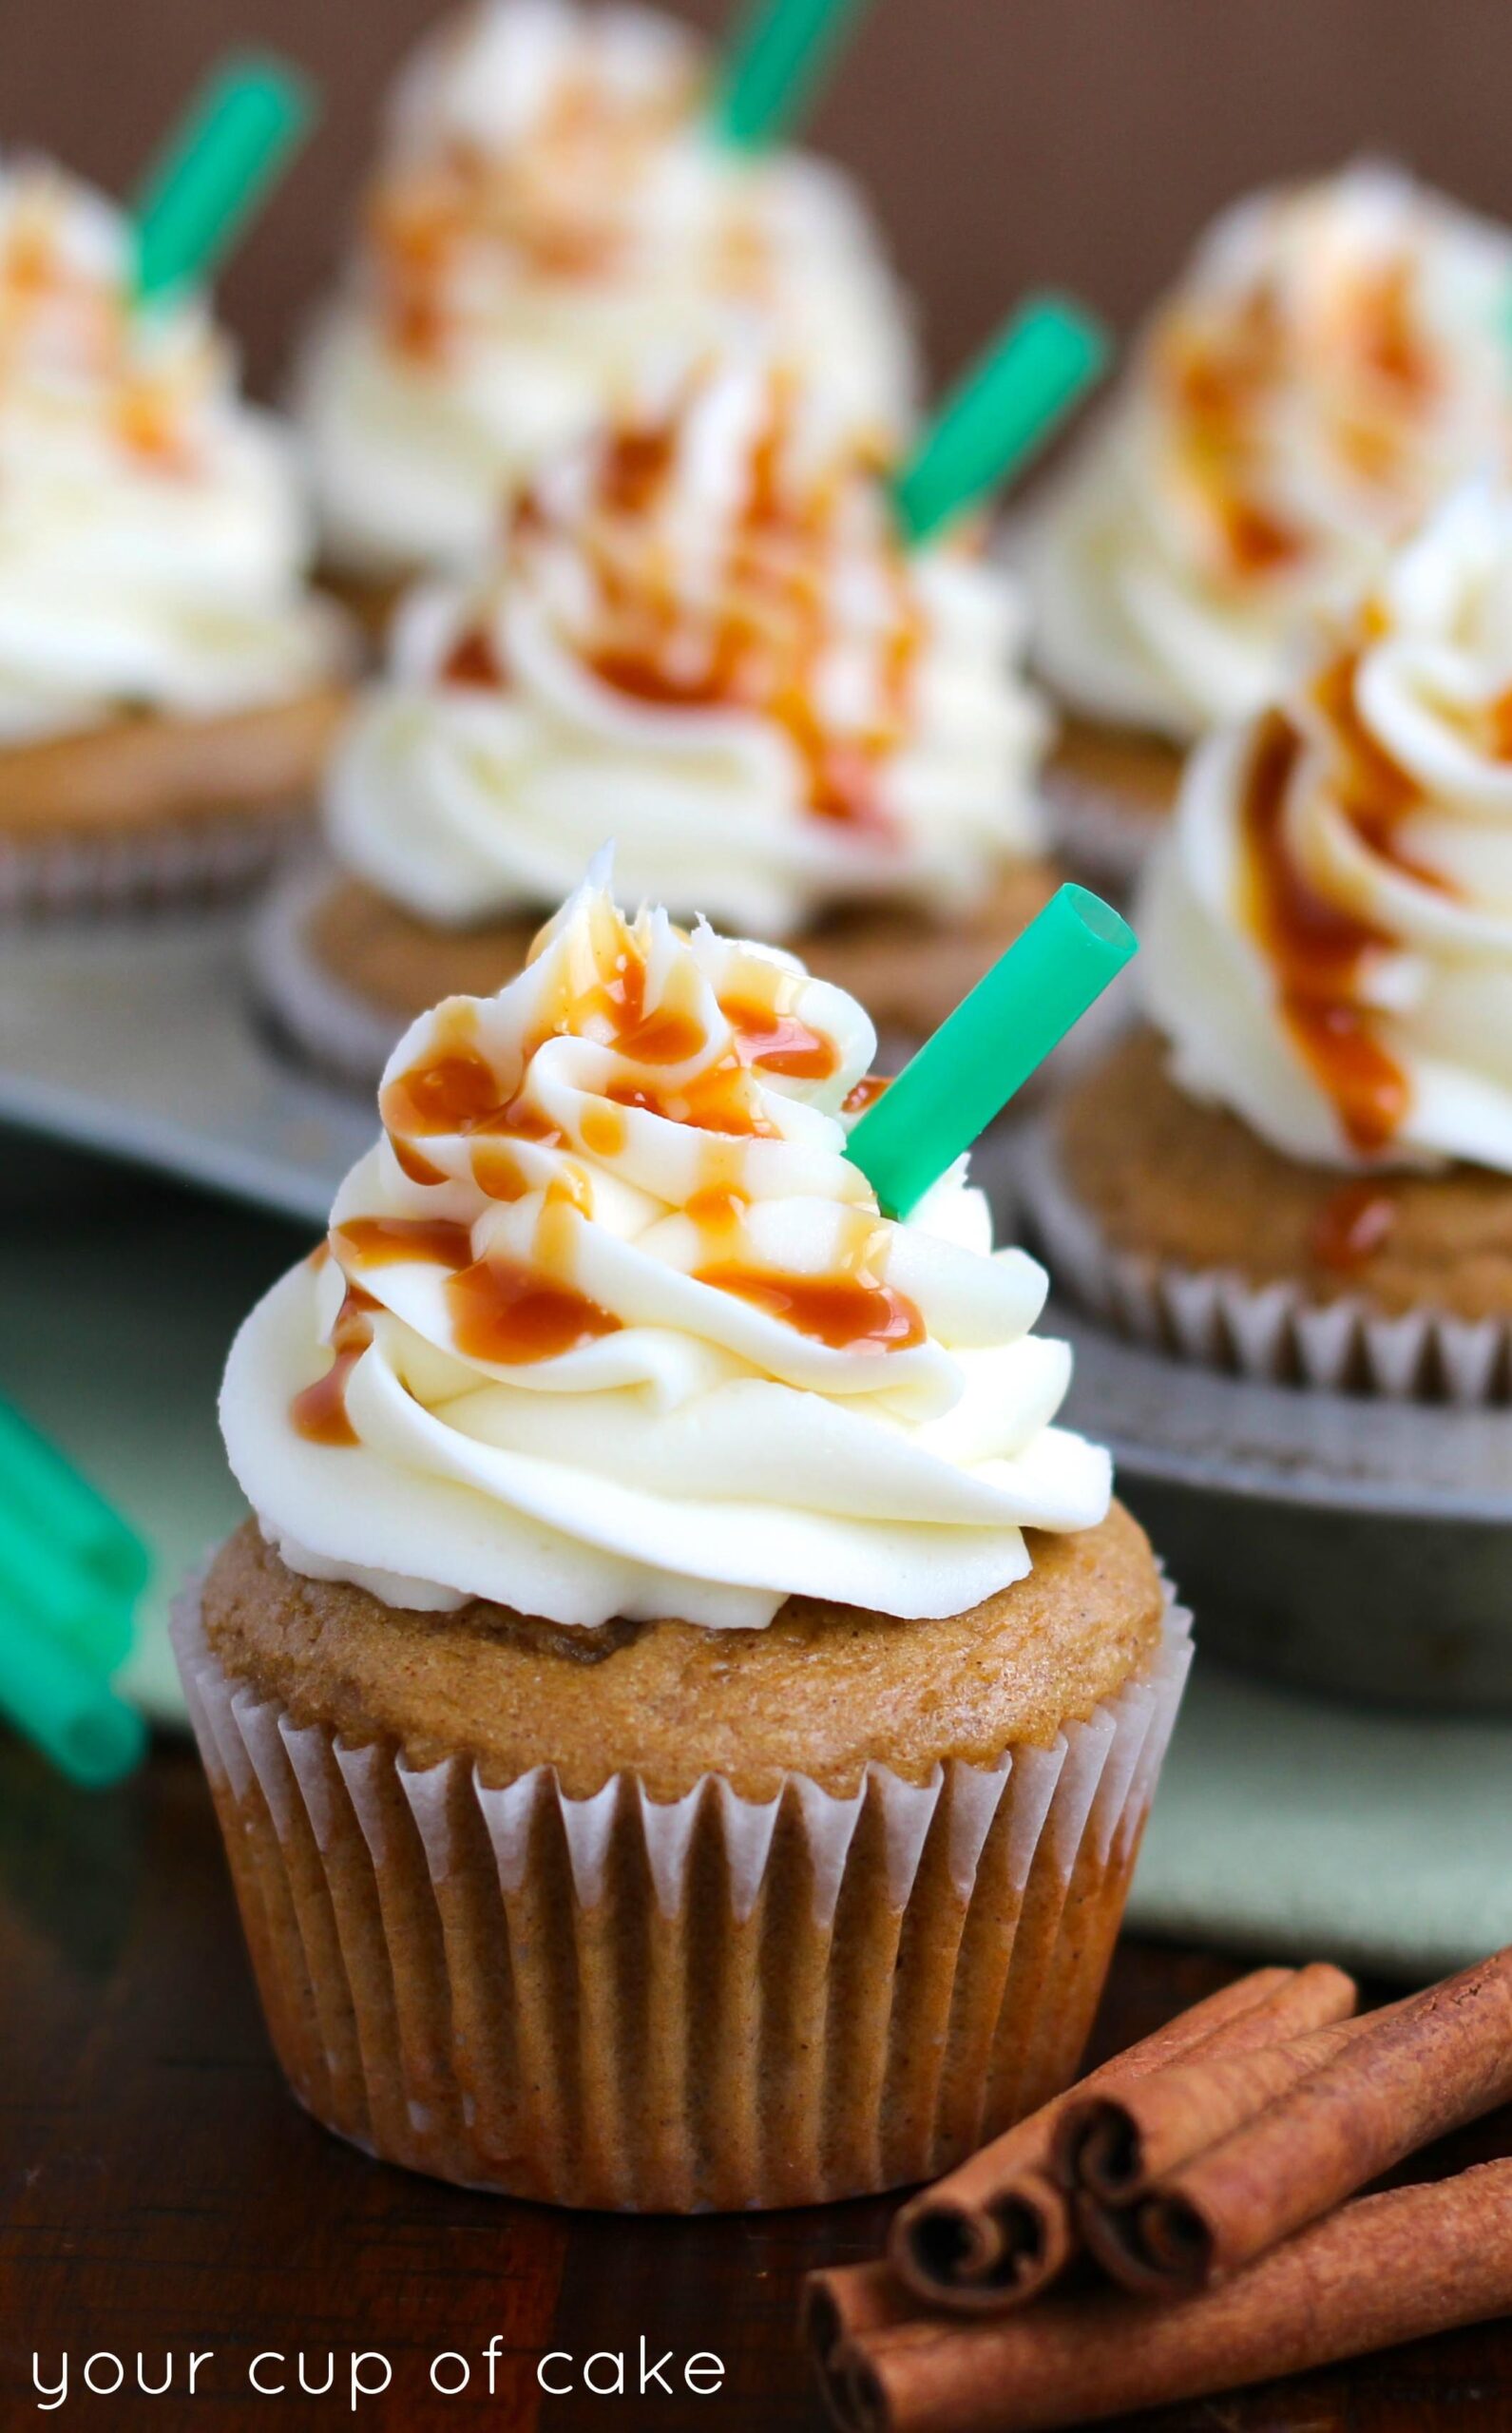  Sweet, spiced and everything nice. It's Pumpkin Spice Latte Cupcakes time!